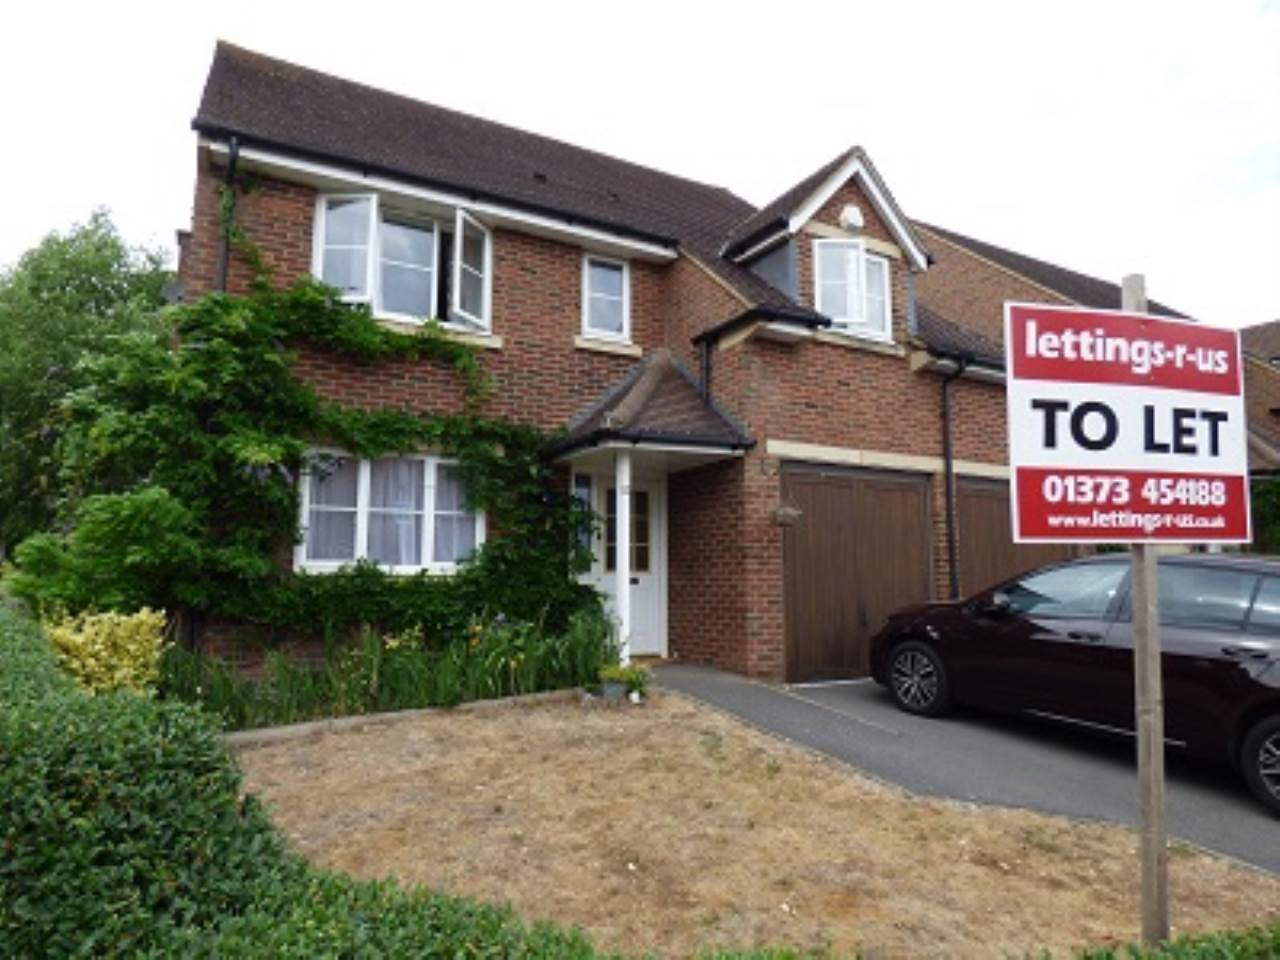 4 bed Detached House for rent in Ashton Common. From Lettings-R-Us Frome